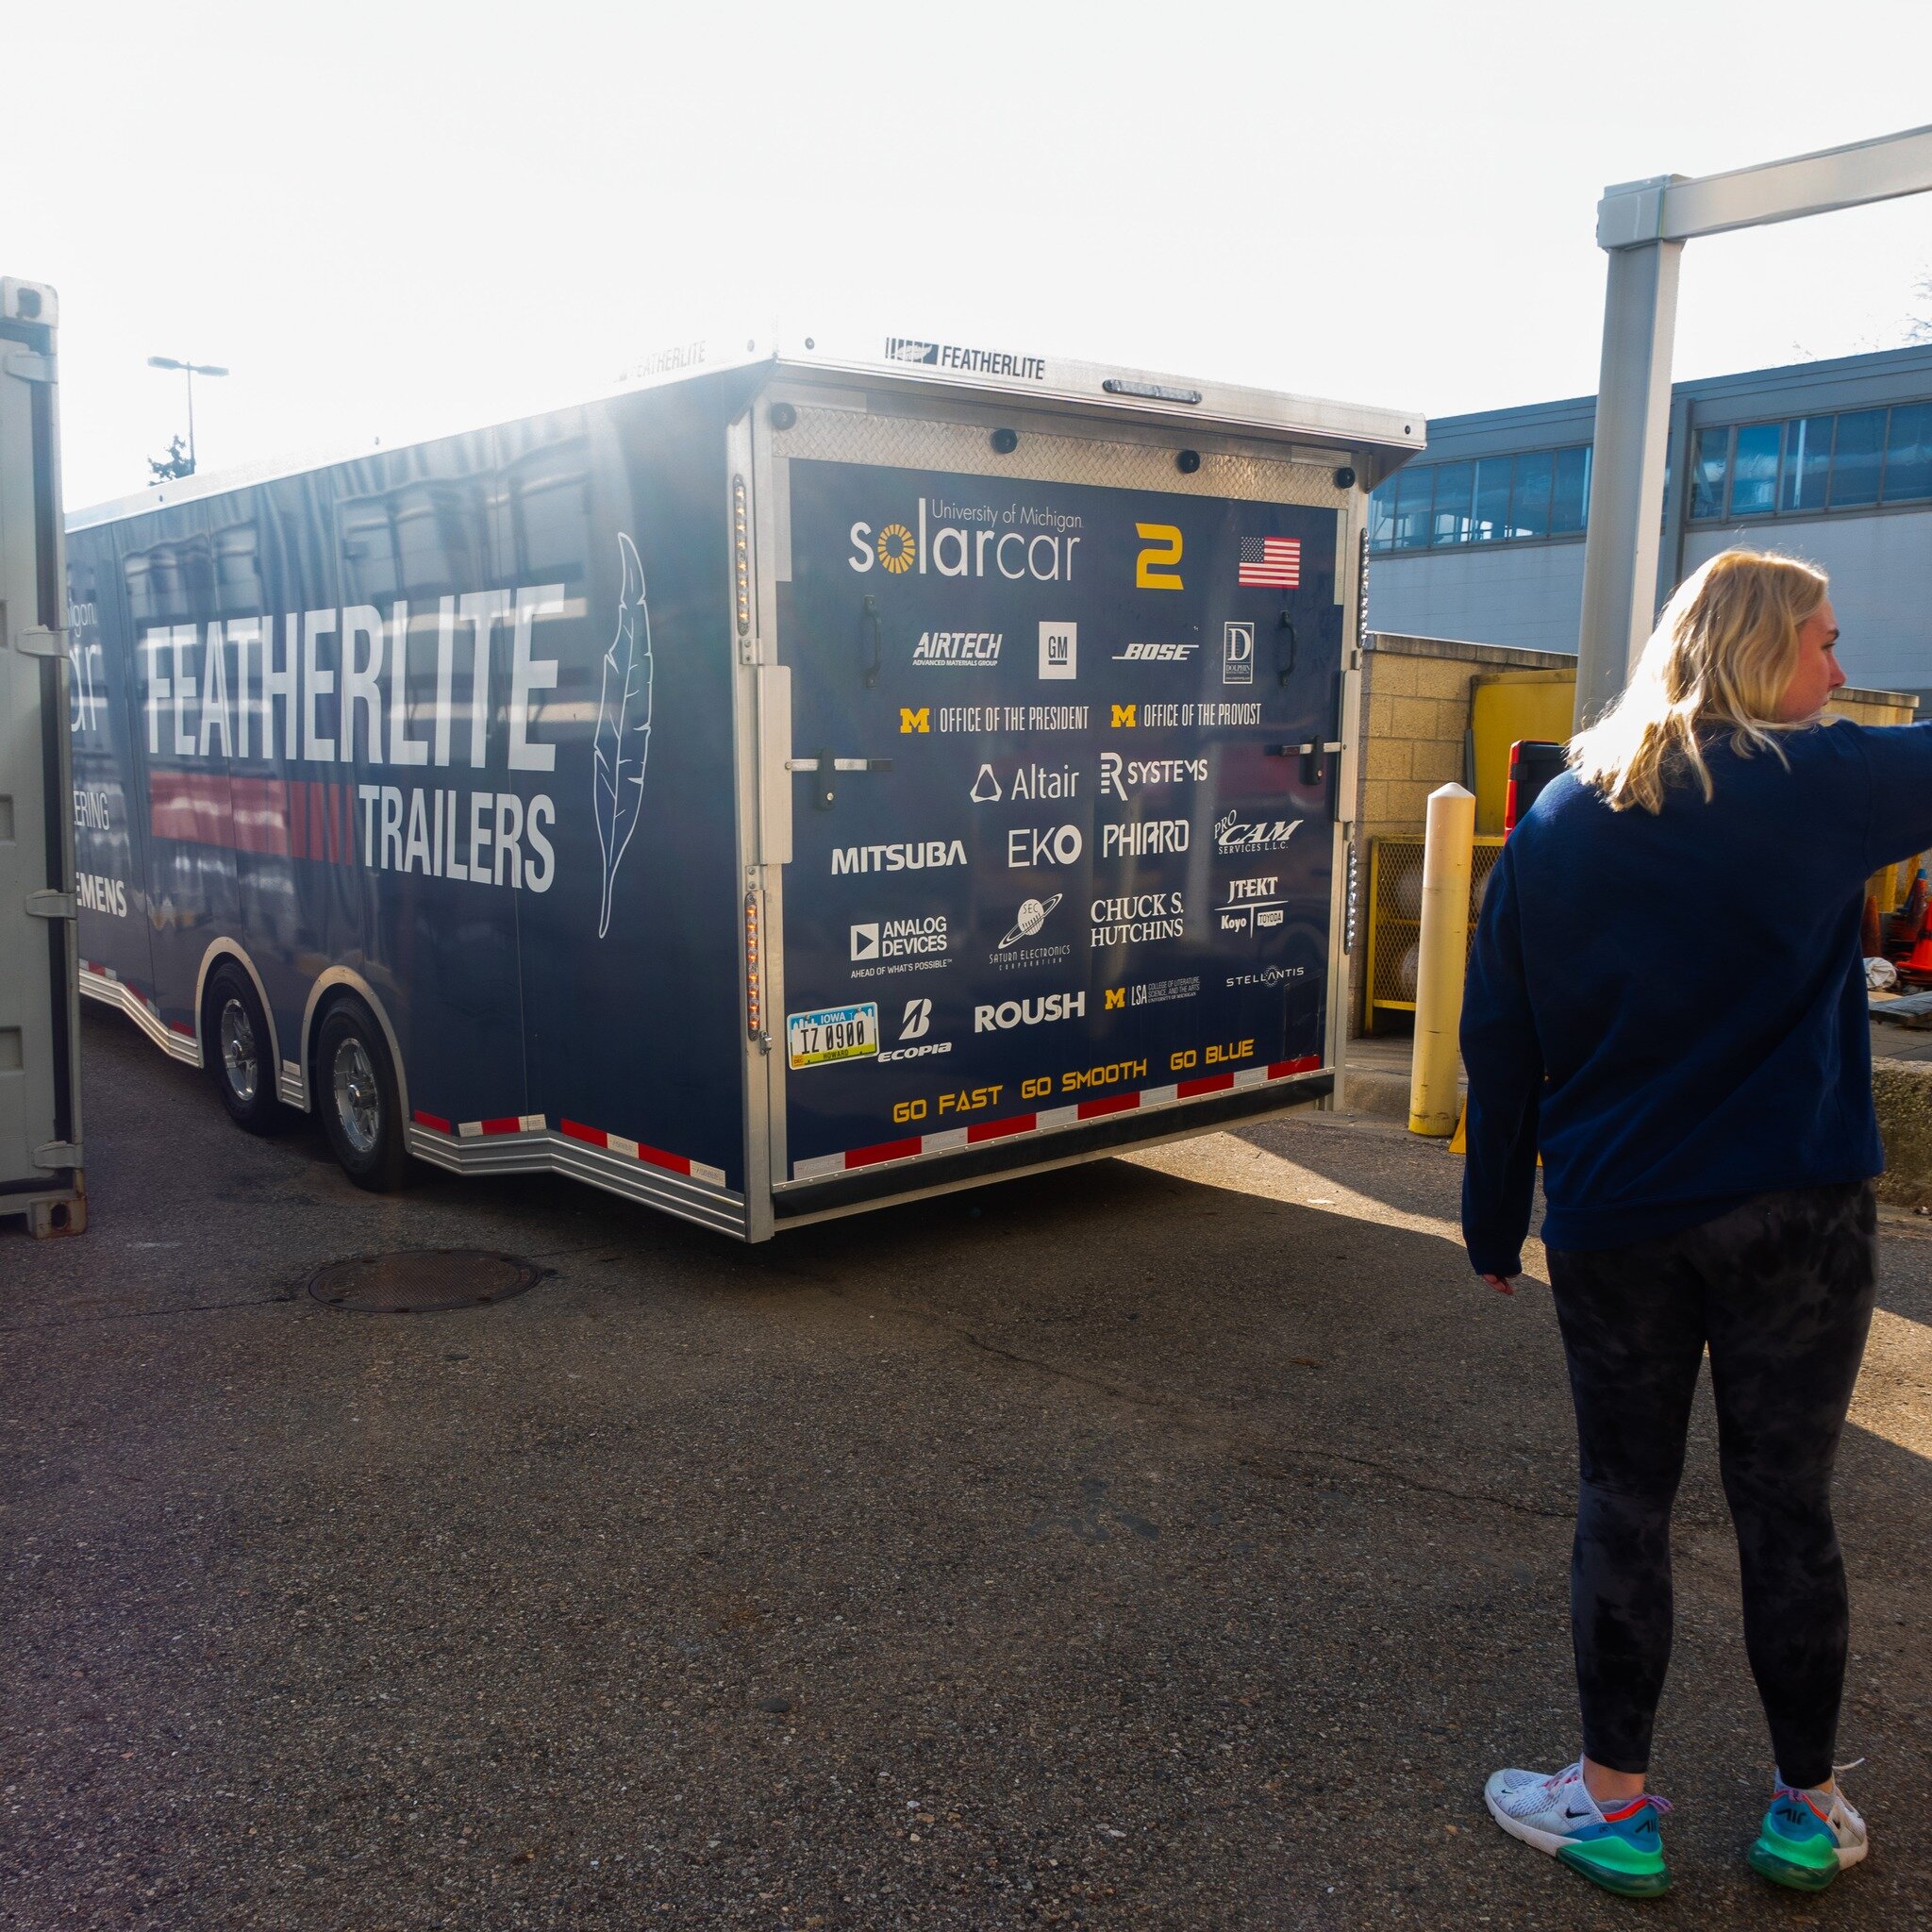 Thanks to @featherlitetrailers, we are able to transport our car to events like our recent visit with Wartech Engineering . We can always count on our trailer to keep our car safe and protected while we're out and about!

#UMichSolarCar #GoBlue #Feat